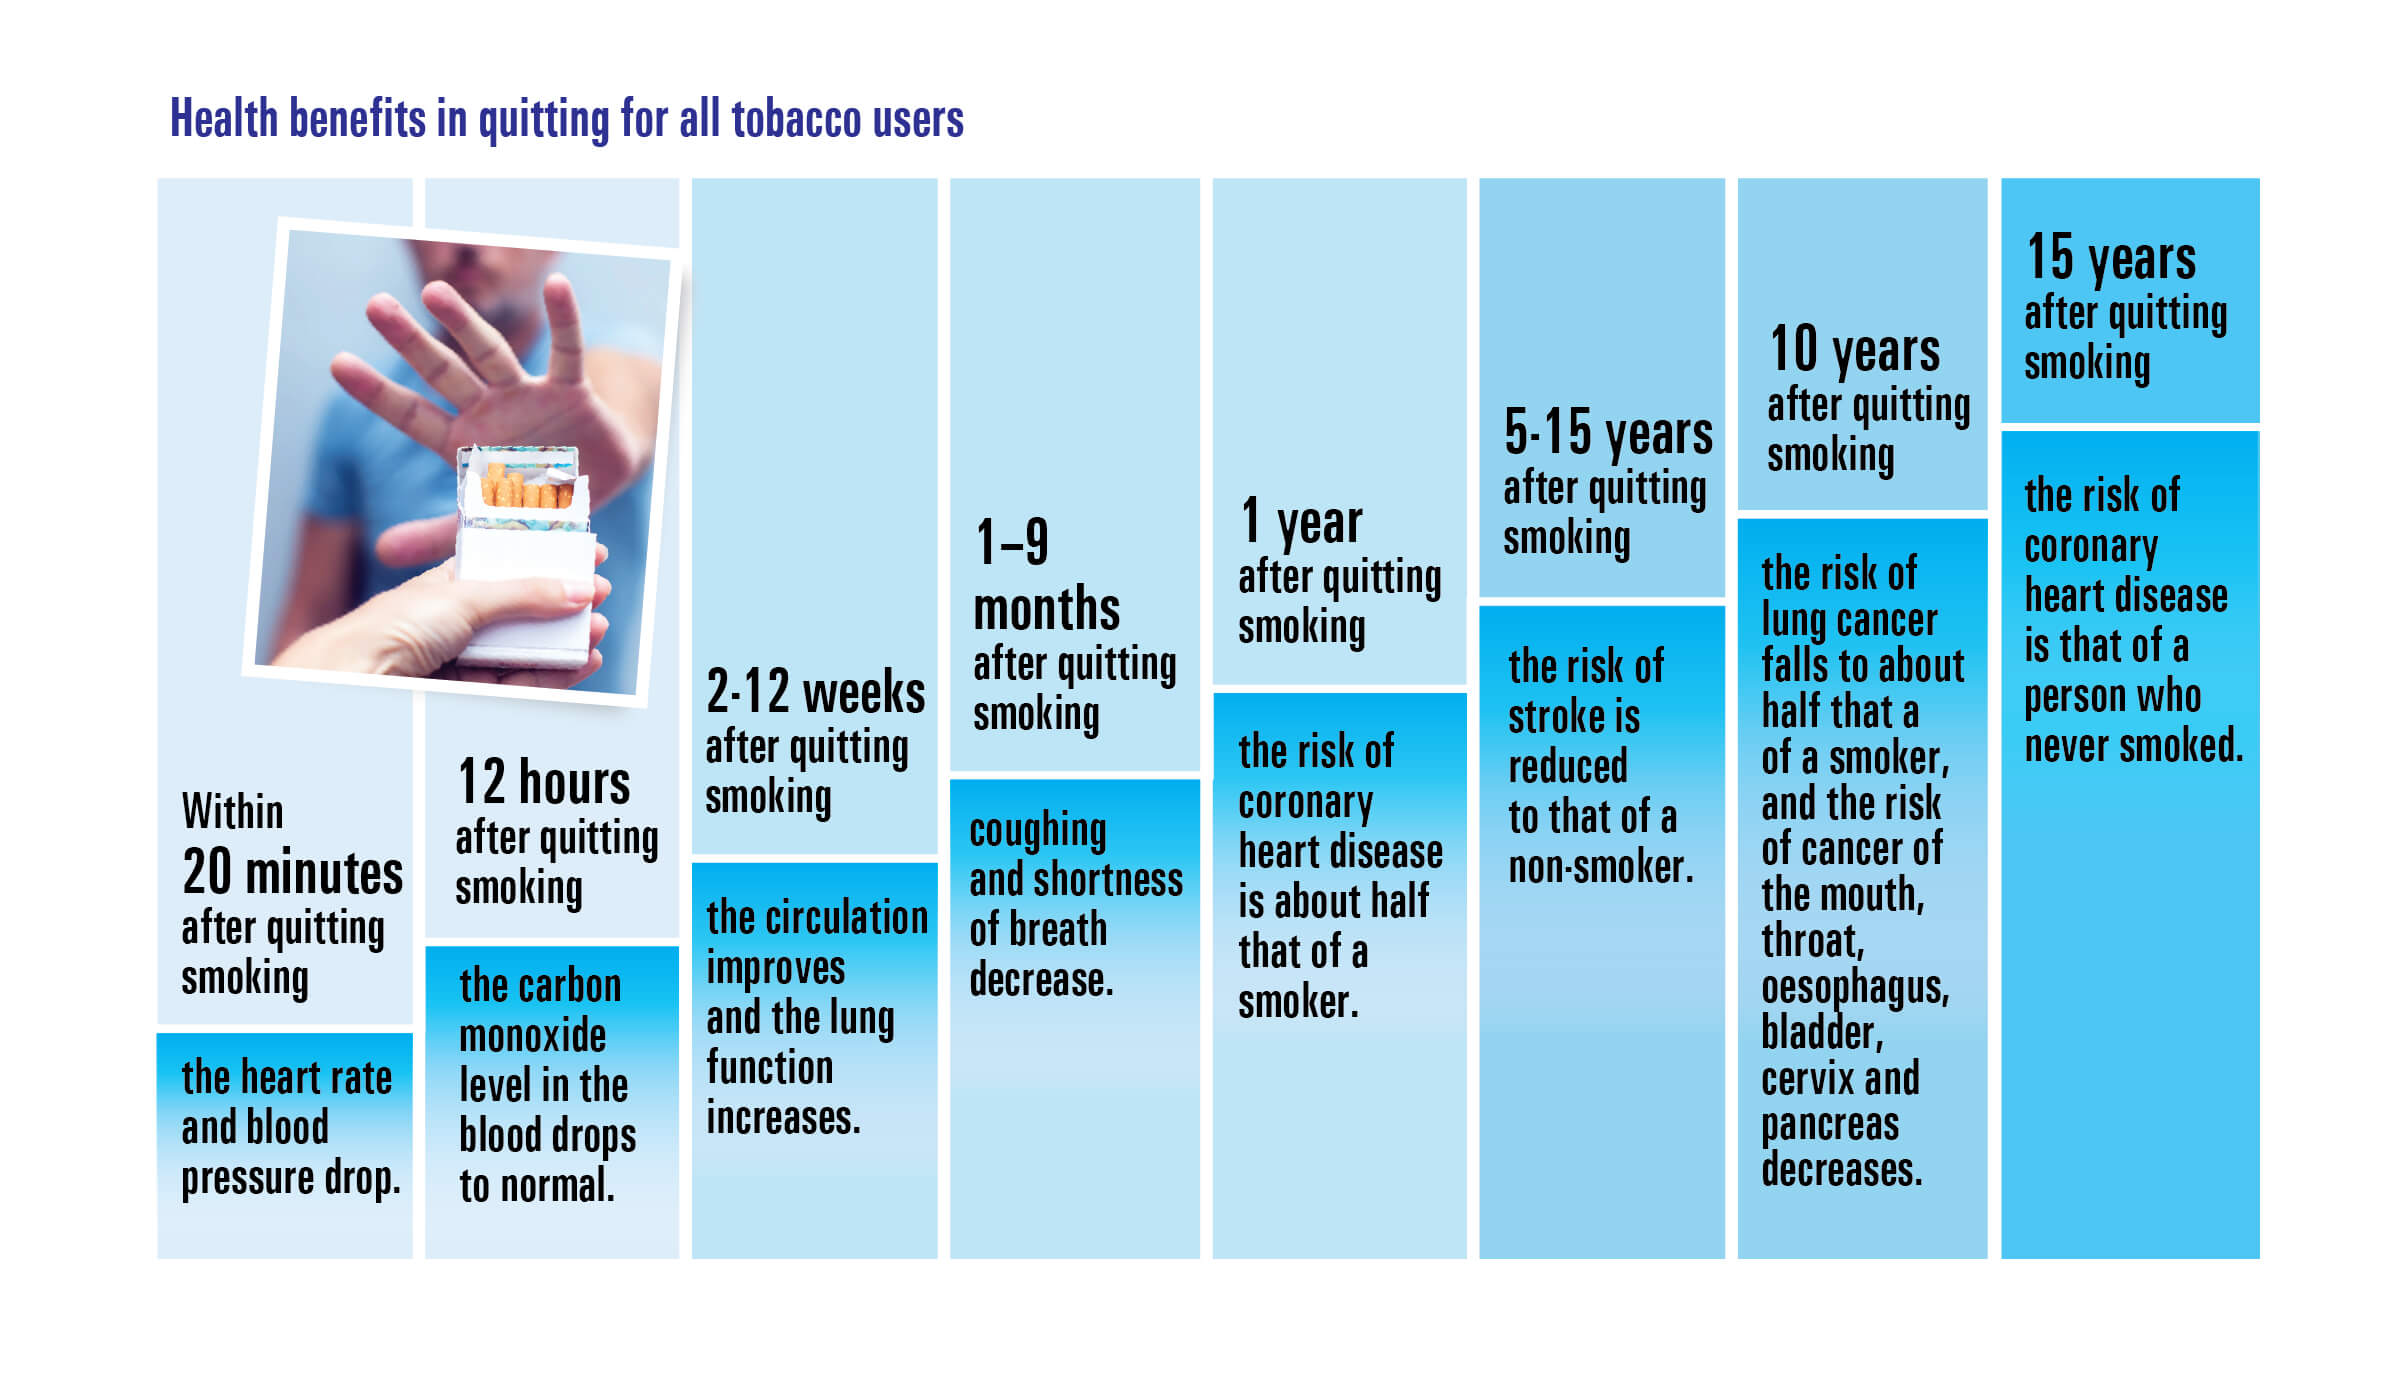 Health benefits in quitting for all tobacco users